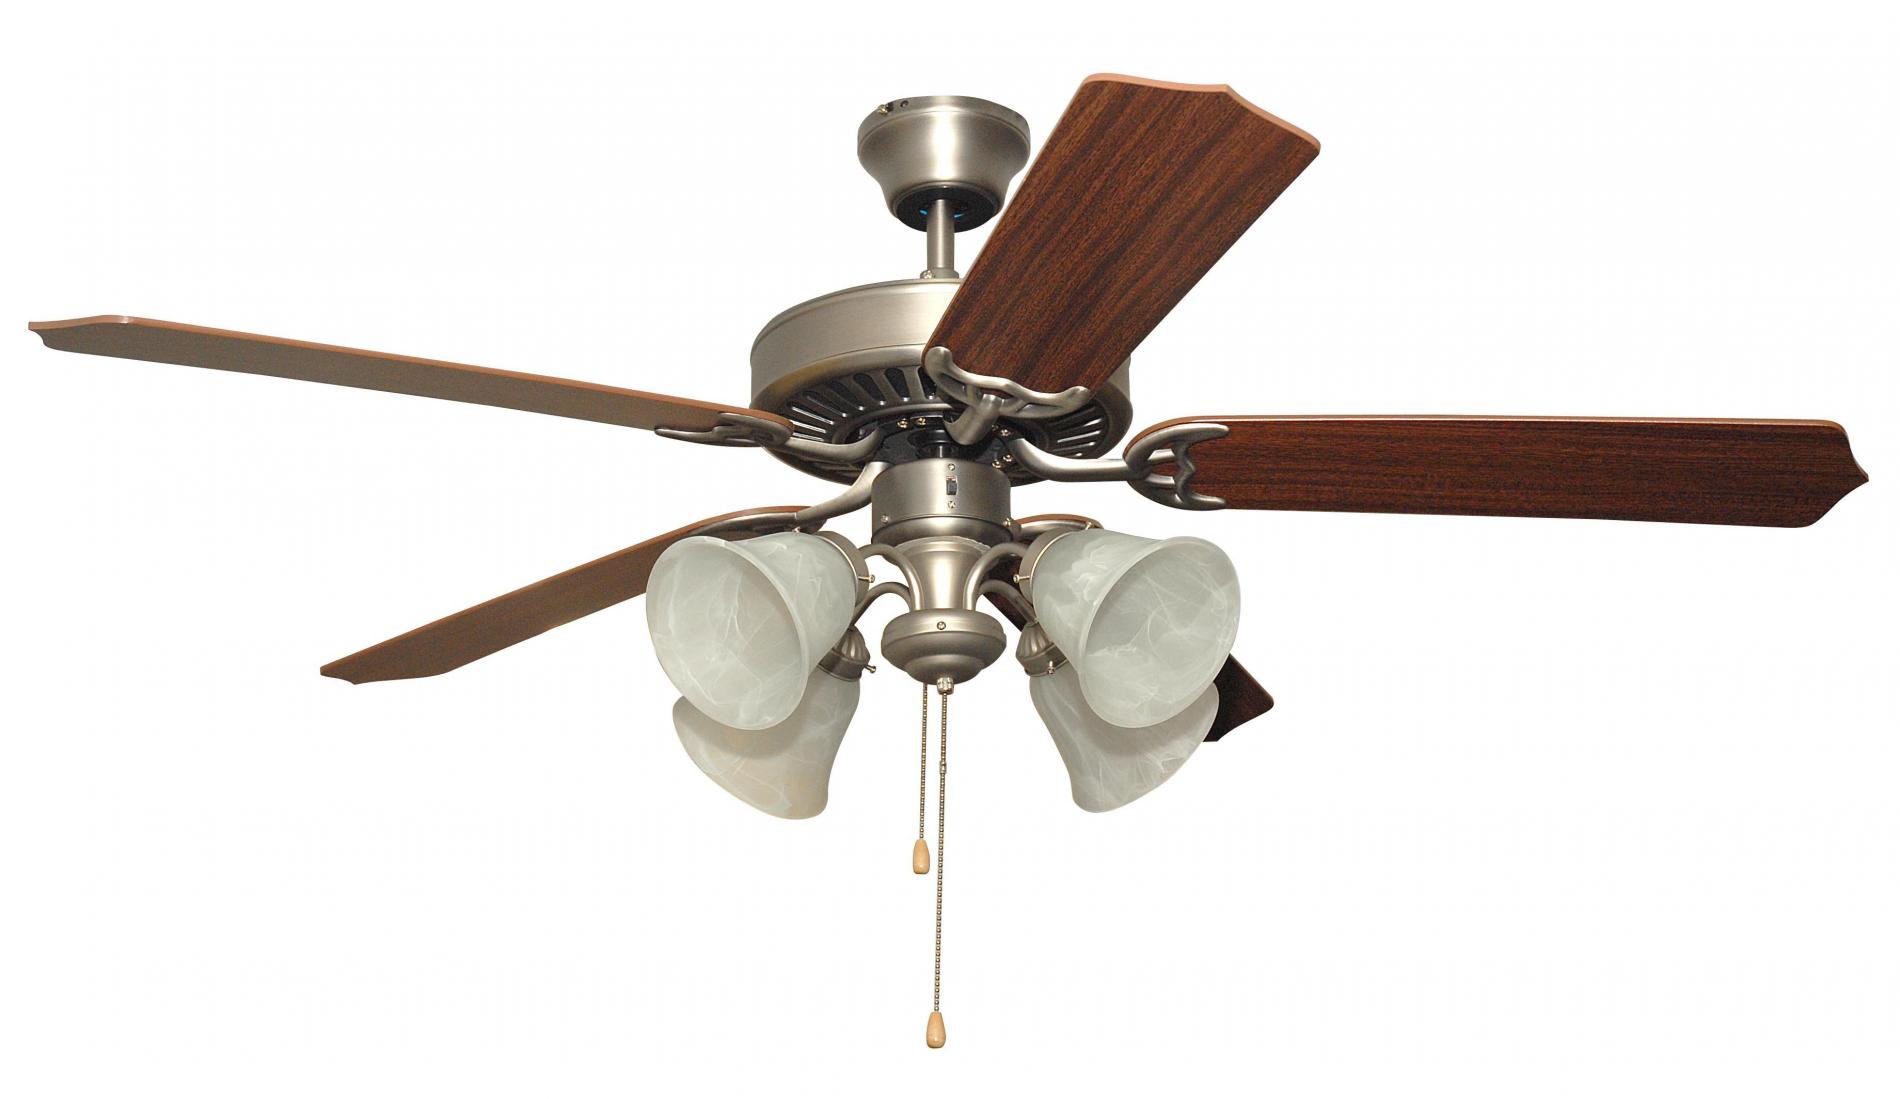 Ceiling fan light - 10 ways to light up your space | Warisan Lighting